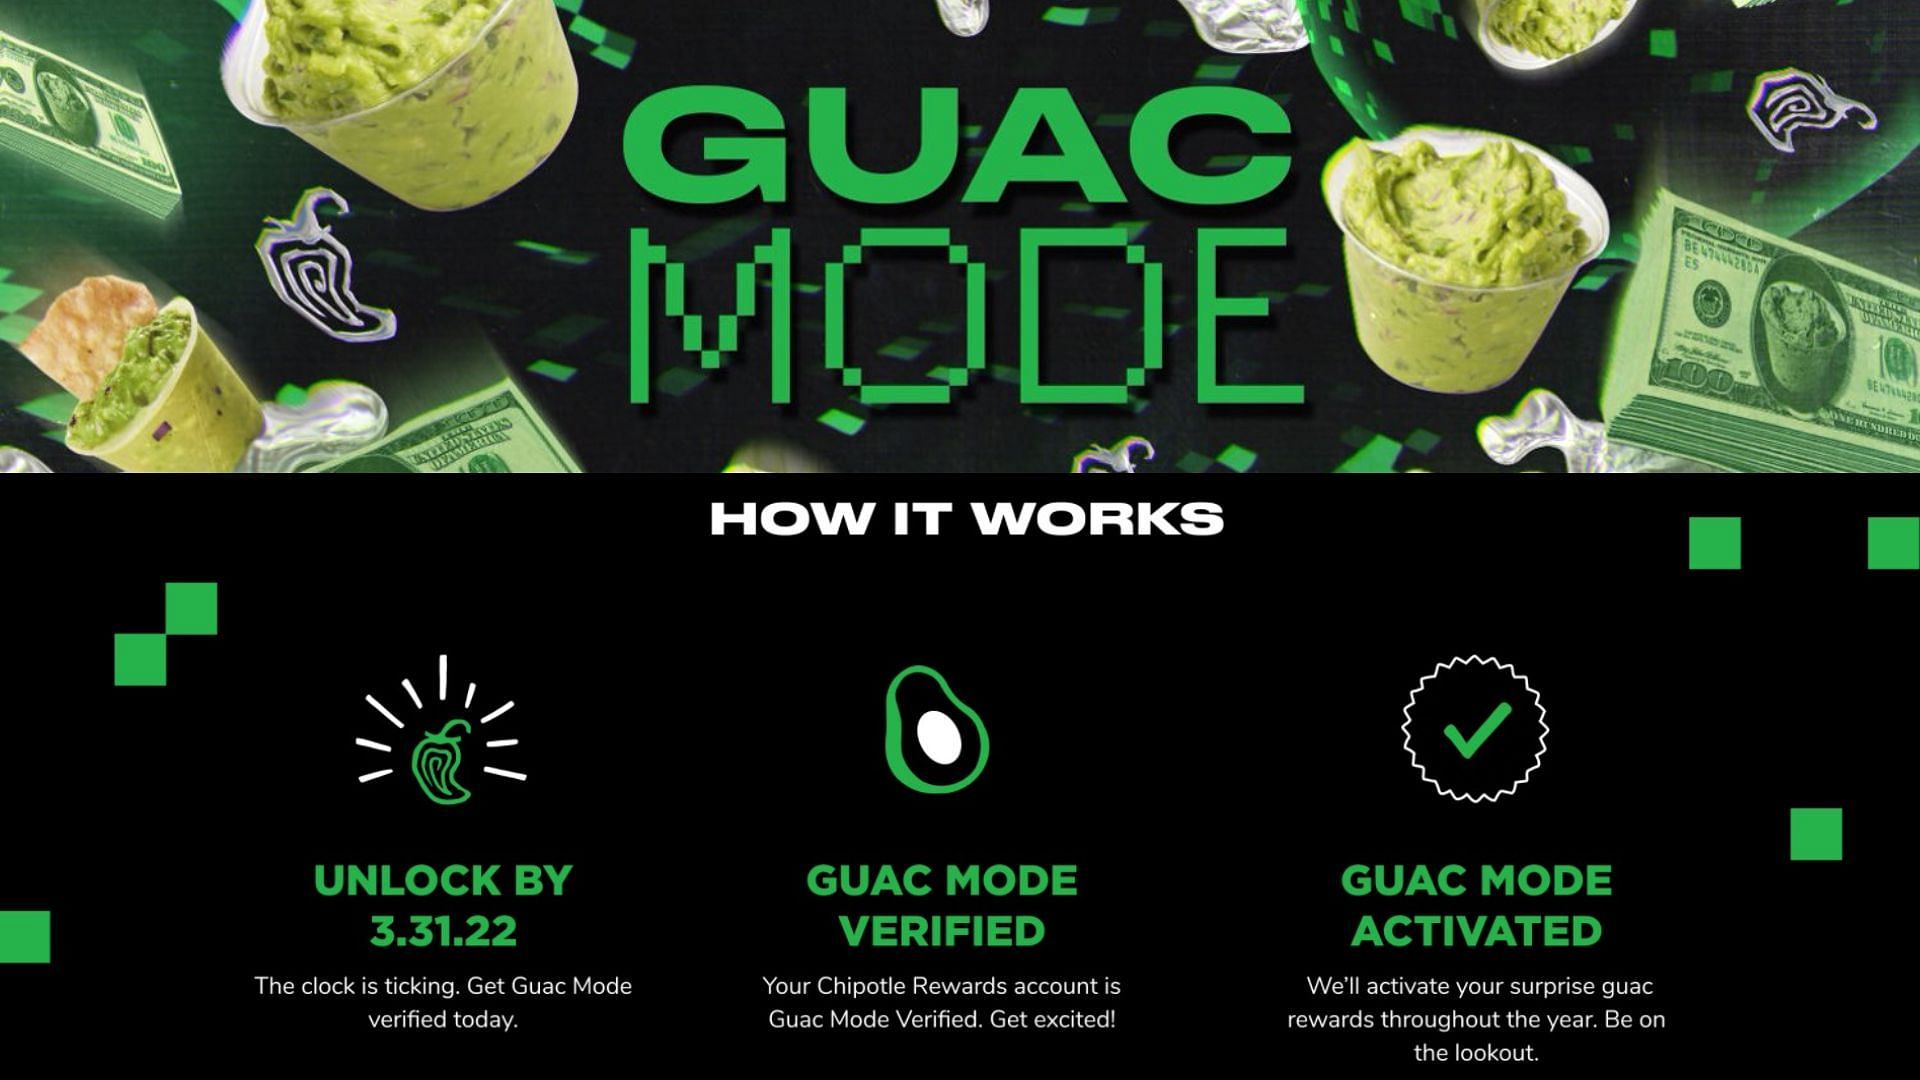 Once &#039;Guac Mode&#039; is activated, members get surprise guac rewards throughout the year (Images via Chipotle)